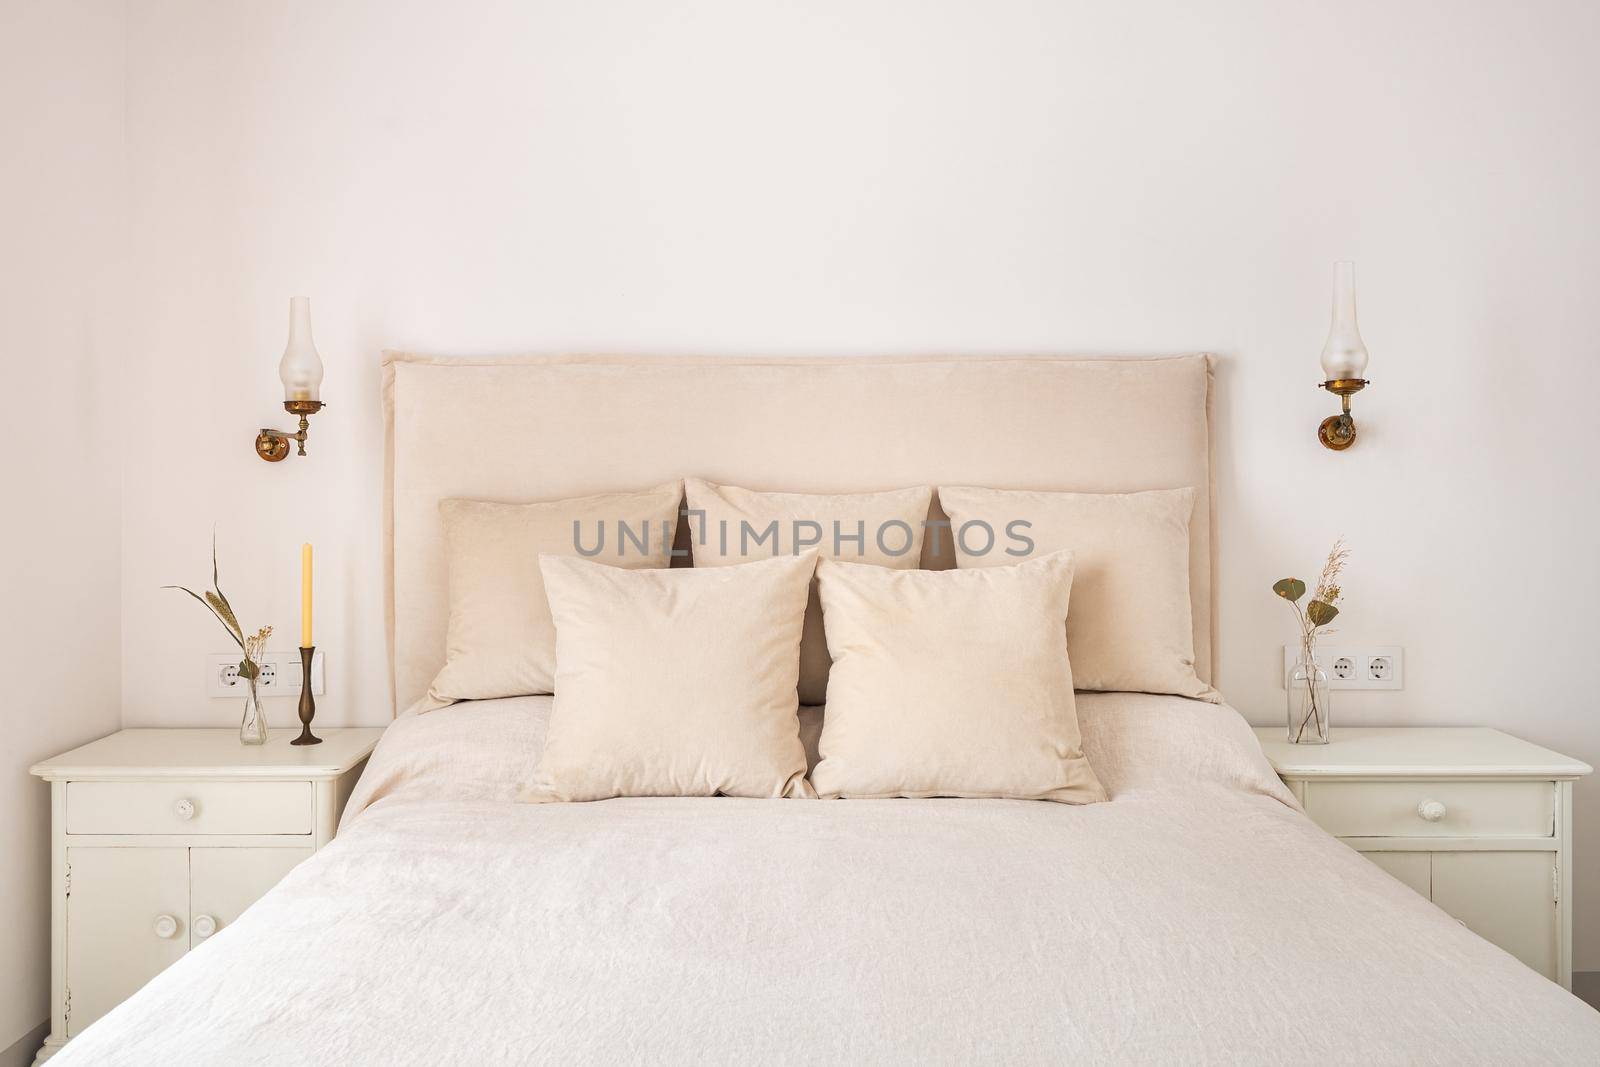 Bright bedroom interior, cozy bed with beige linen, dry flowers on a bedside table